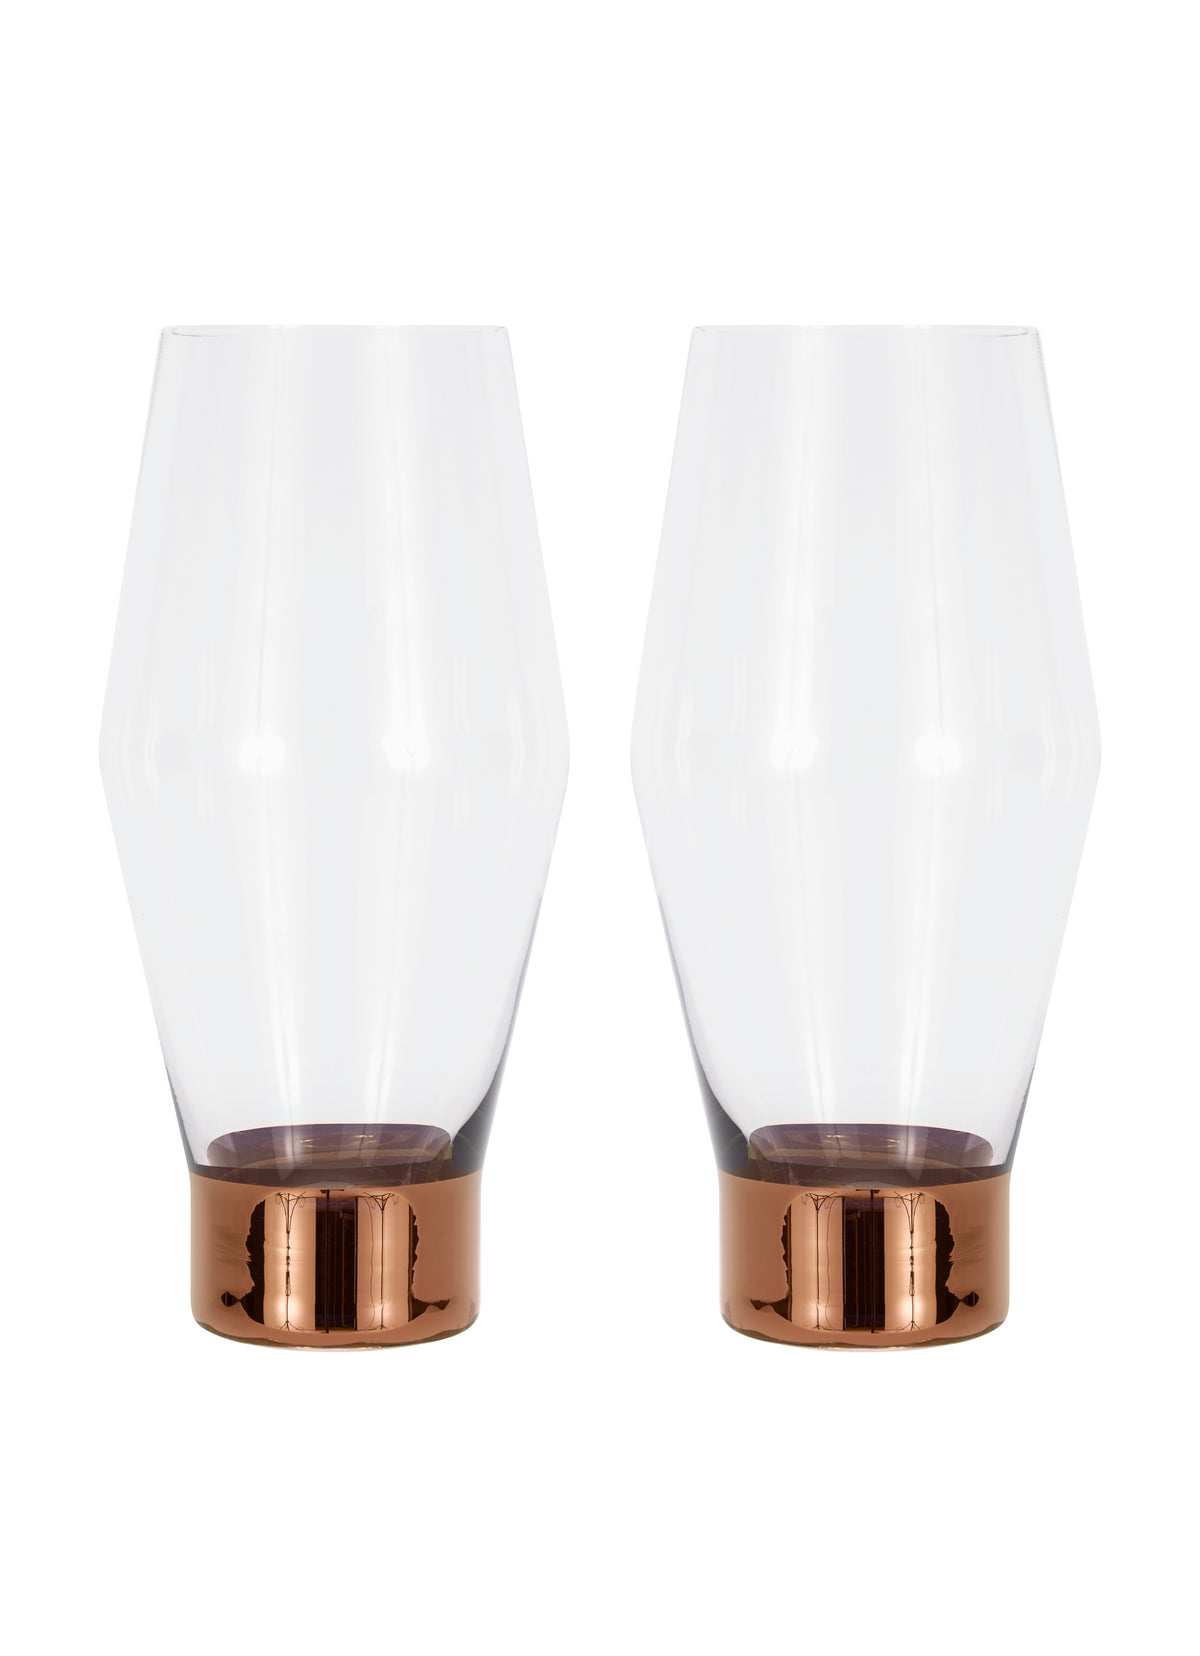 Tank Beer Glasses Copper Set of Two by Tom Dixon